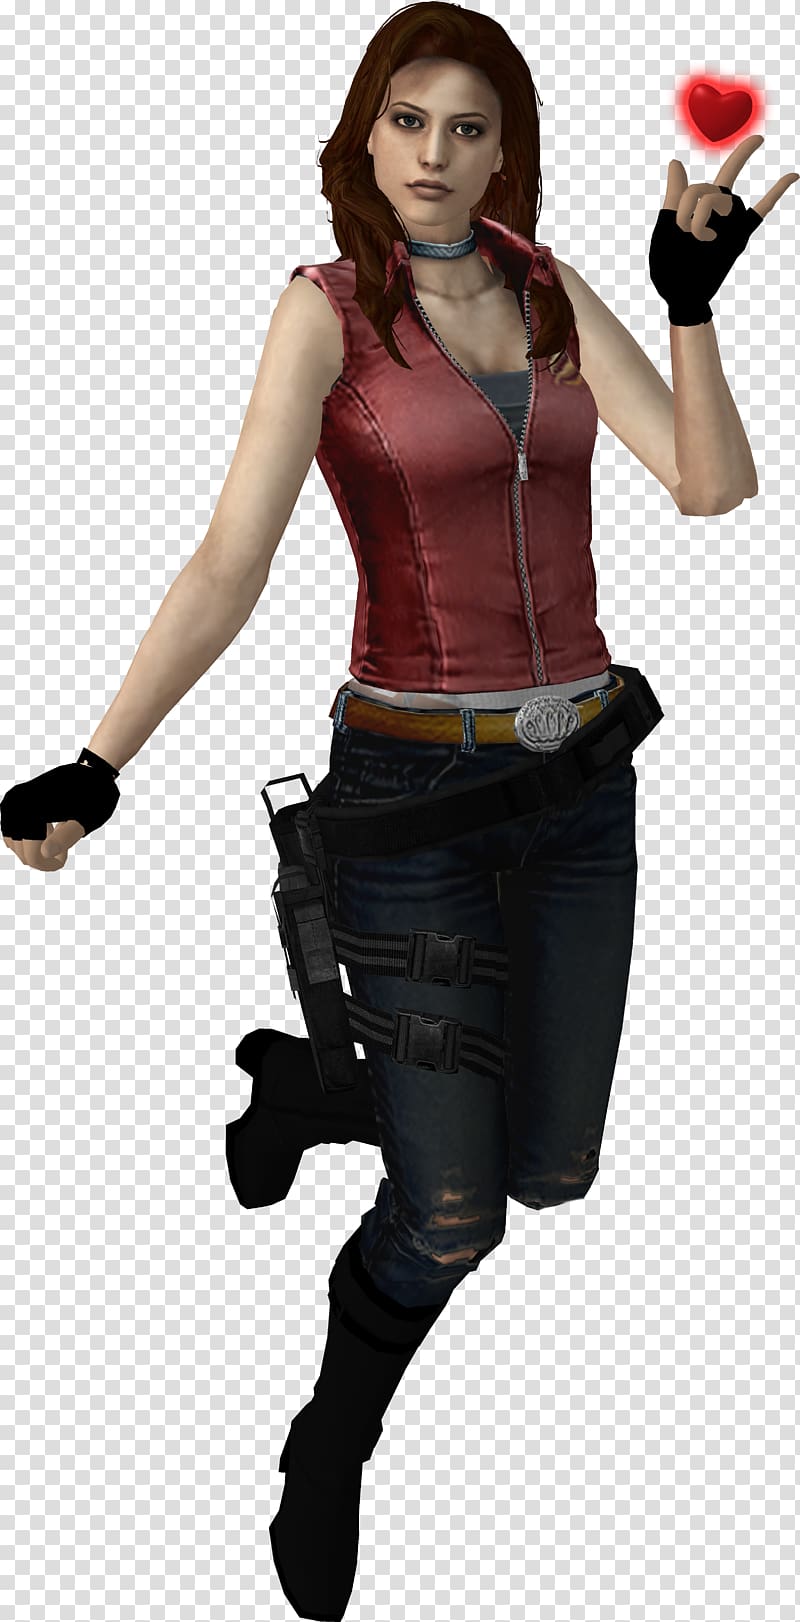 Milla Jovovich Claire Redfield Resident Evil 2 Resident Evil 6 Resident Evil: Revelations 2, milla jovovich transparent background PNG clipart